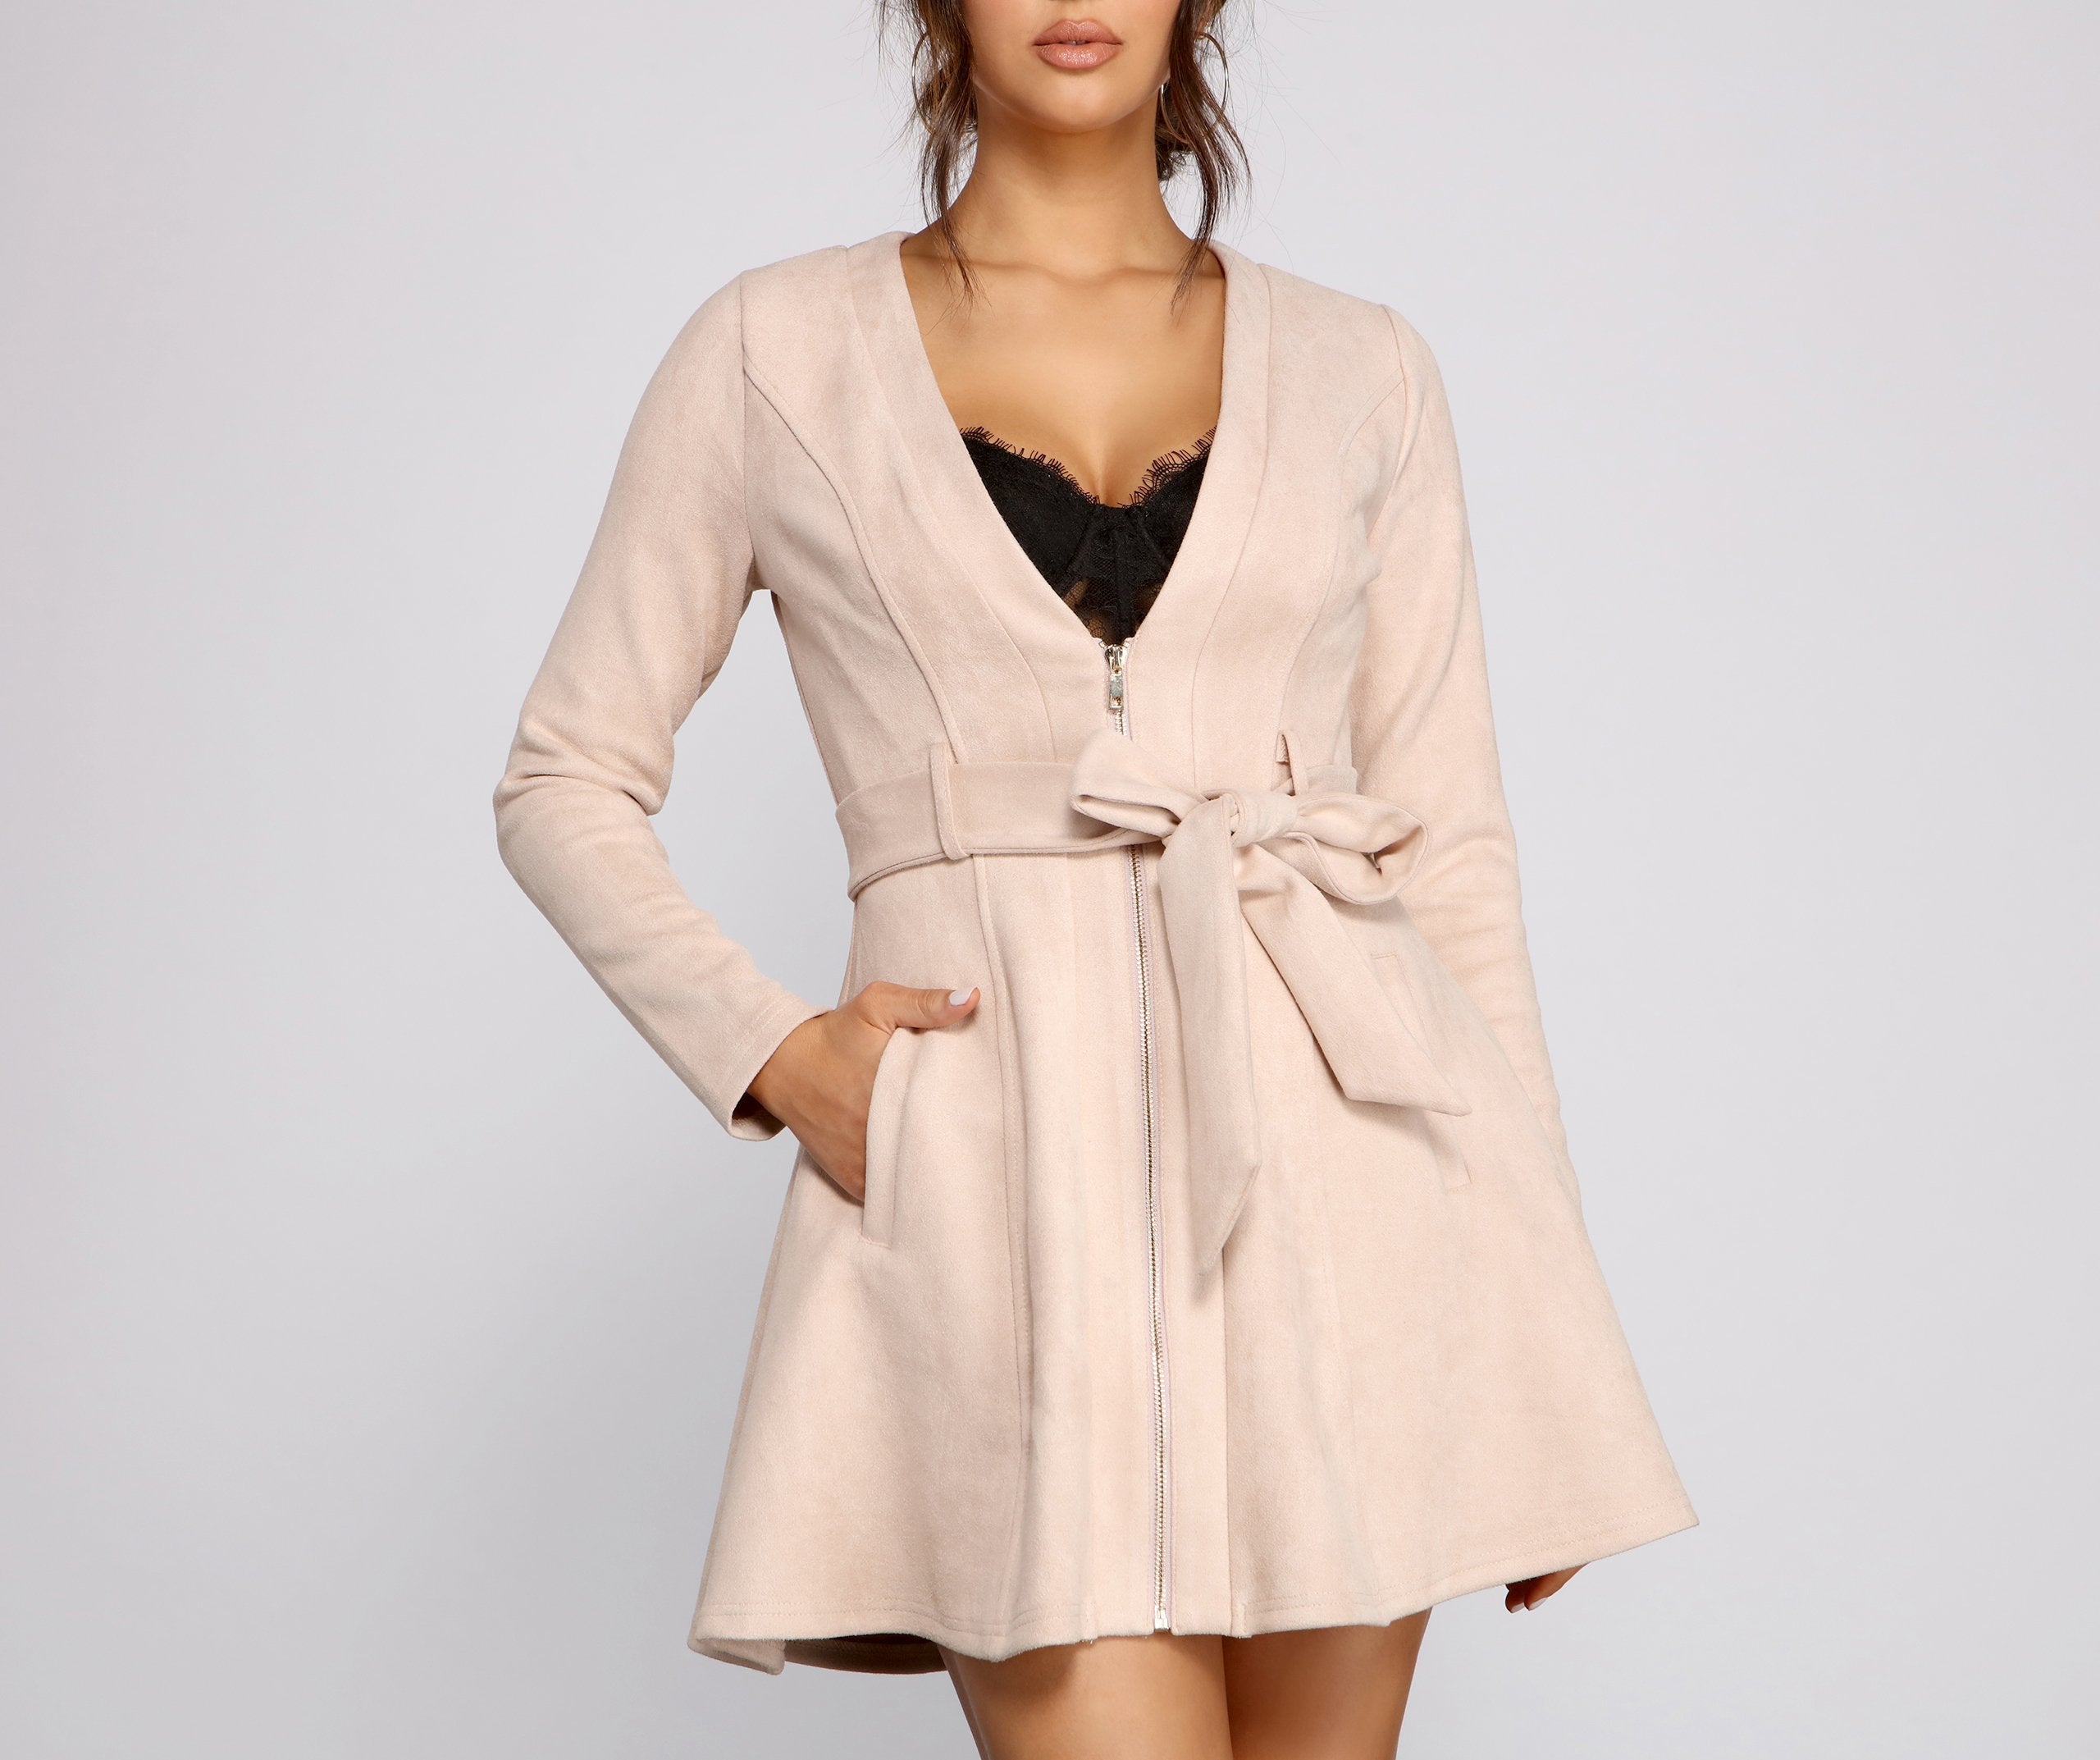 Miss Bossy Trench Dress - Lady Occasions